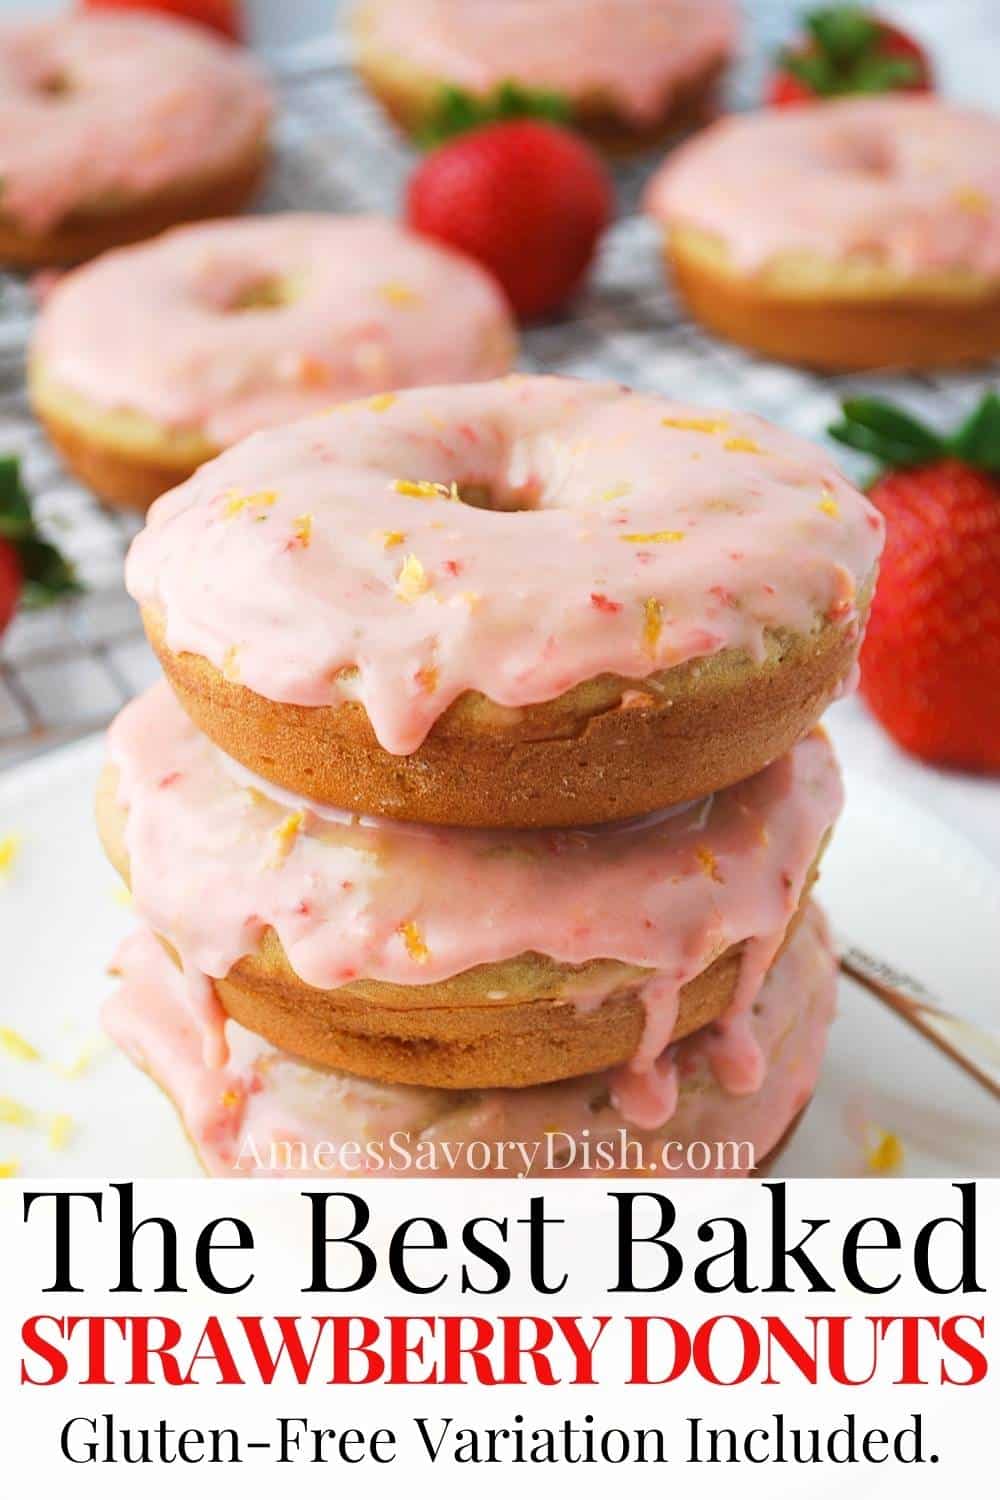 An easy melt-in-your-mouth baked strawberry donut recipe made with ripe strawberries topped with a fresh strawberry lemon glaze. via @Ameessavorydish